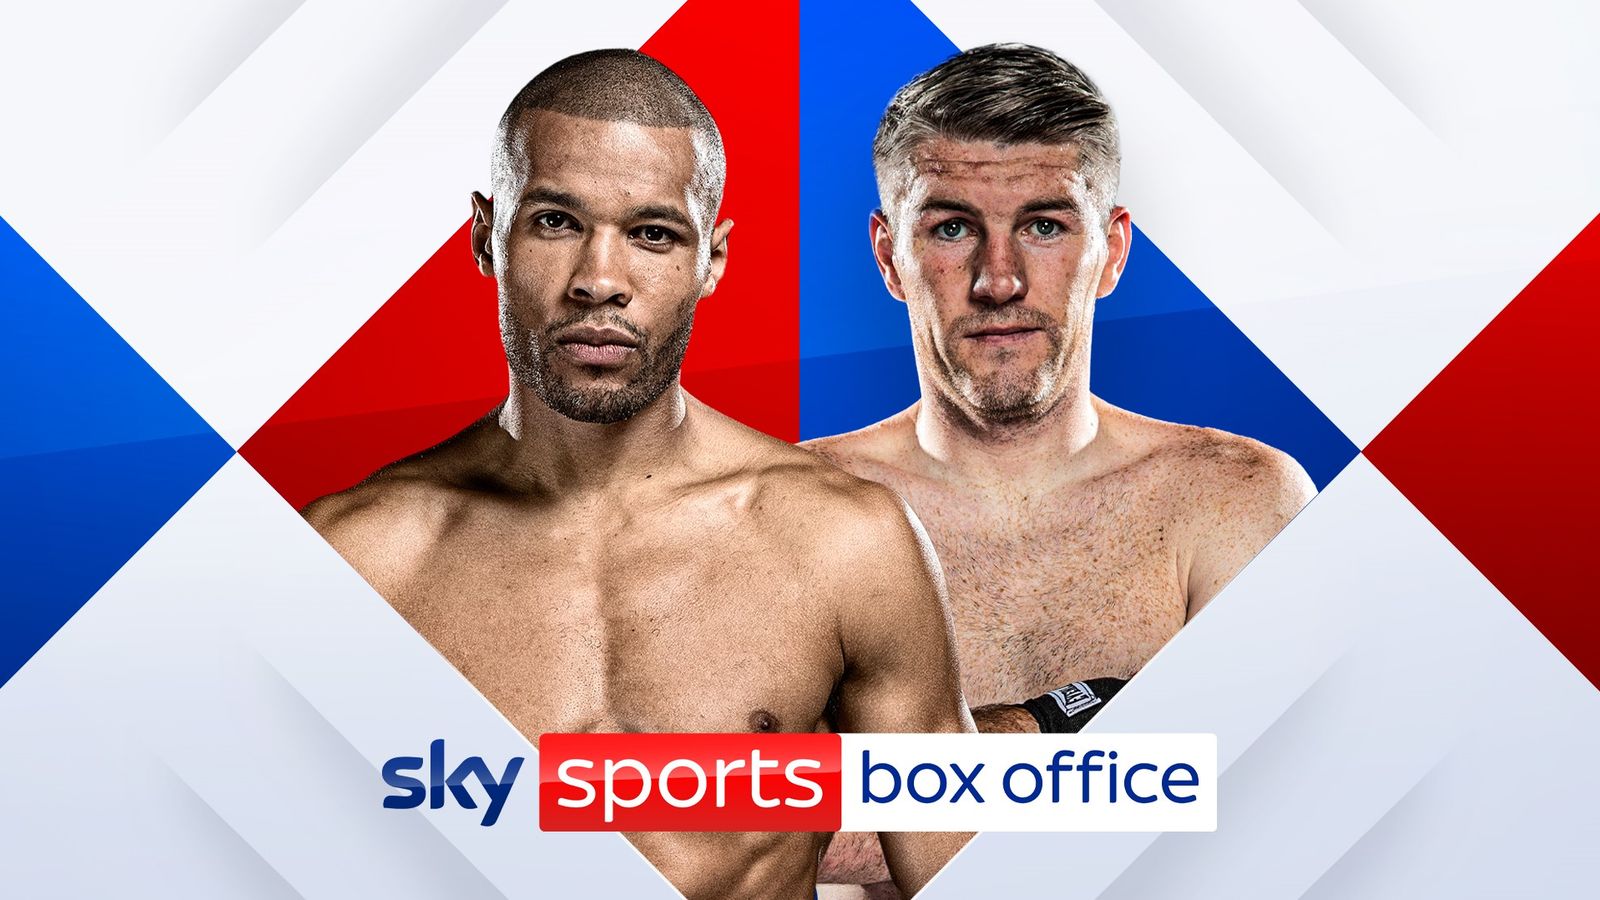 Chris Eubank Jr vs Liam Smith – Fight date, weight and venue confirmed for 2023 showdown live on Sky Sports Box Office